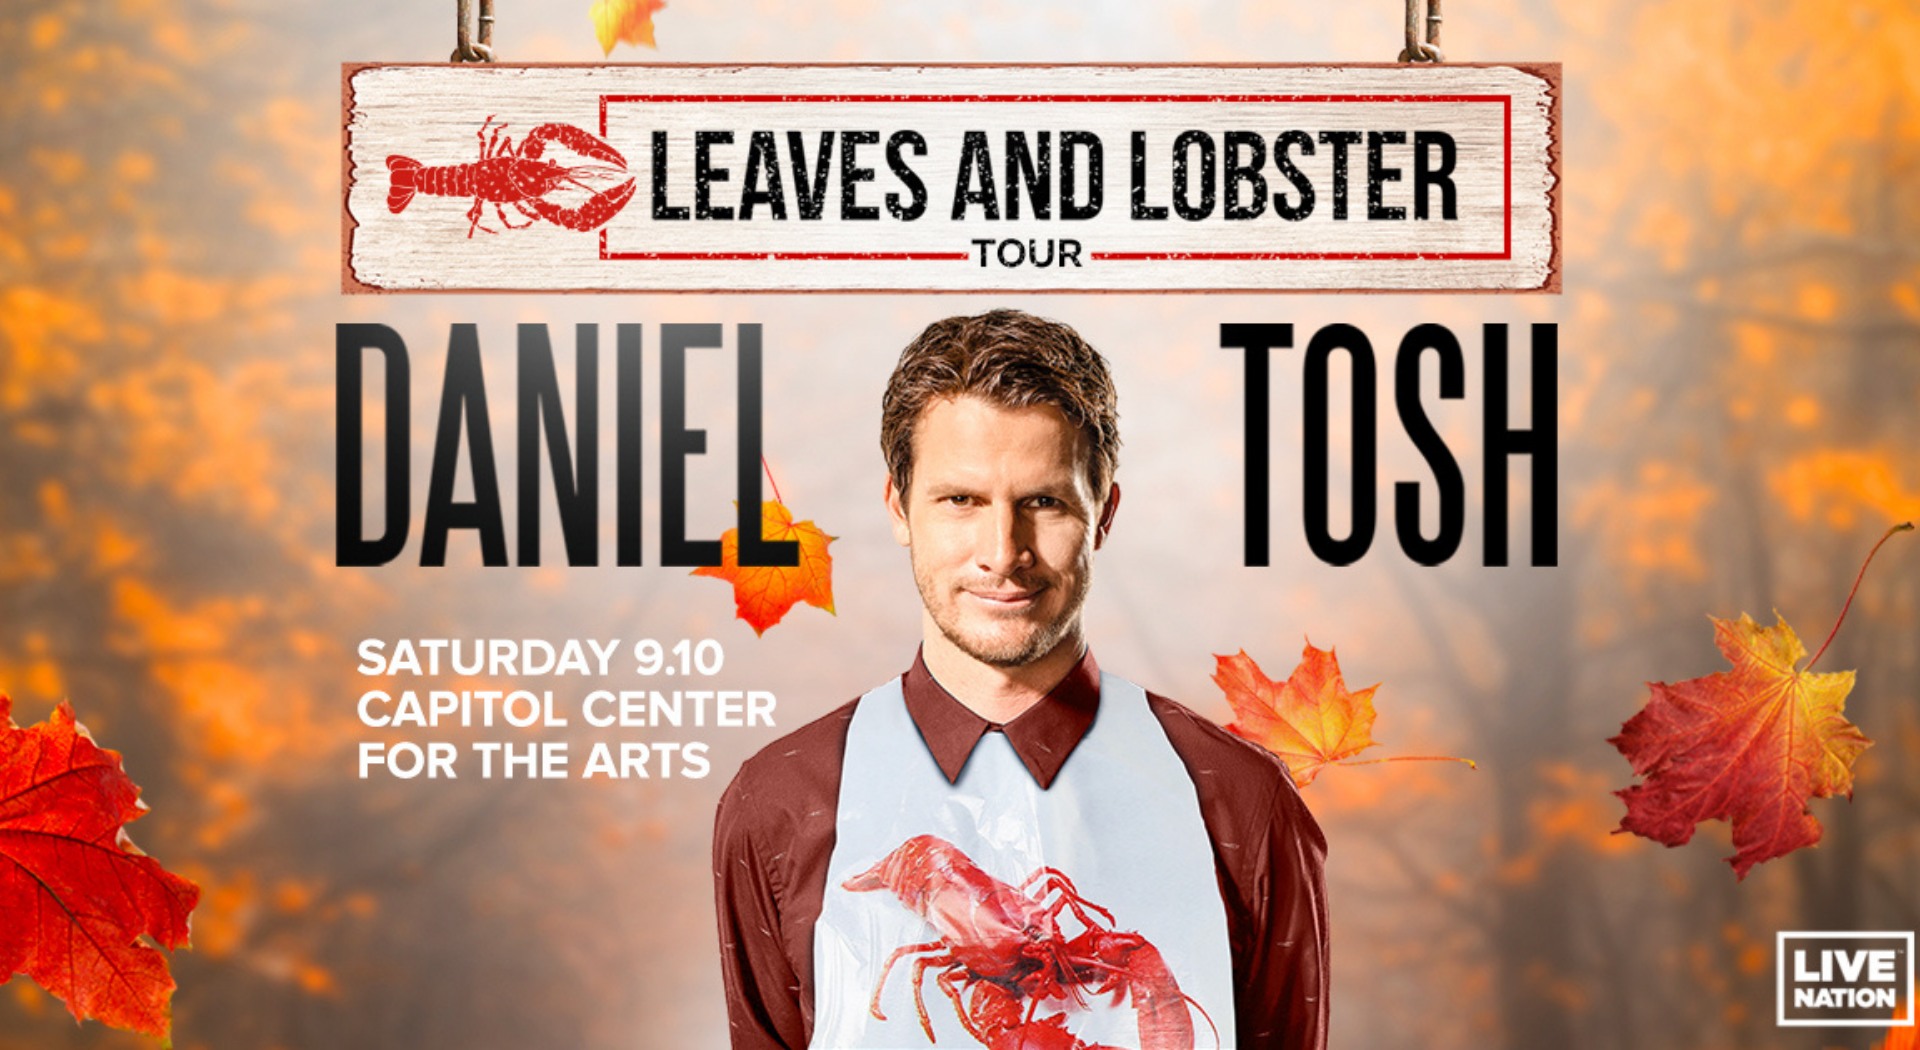 Win Tickets to See Daniel Tosh at Capitol Center For the Arts